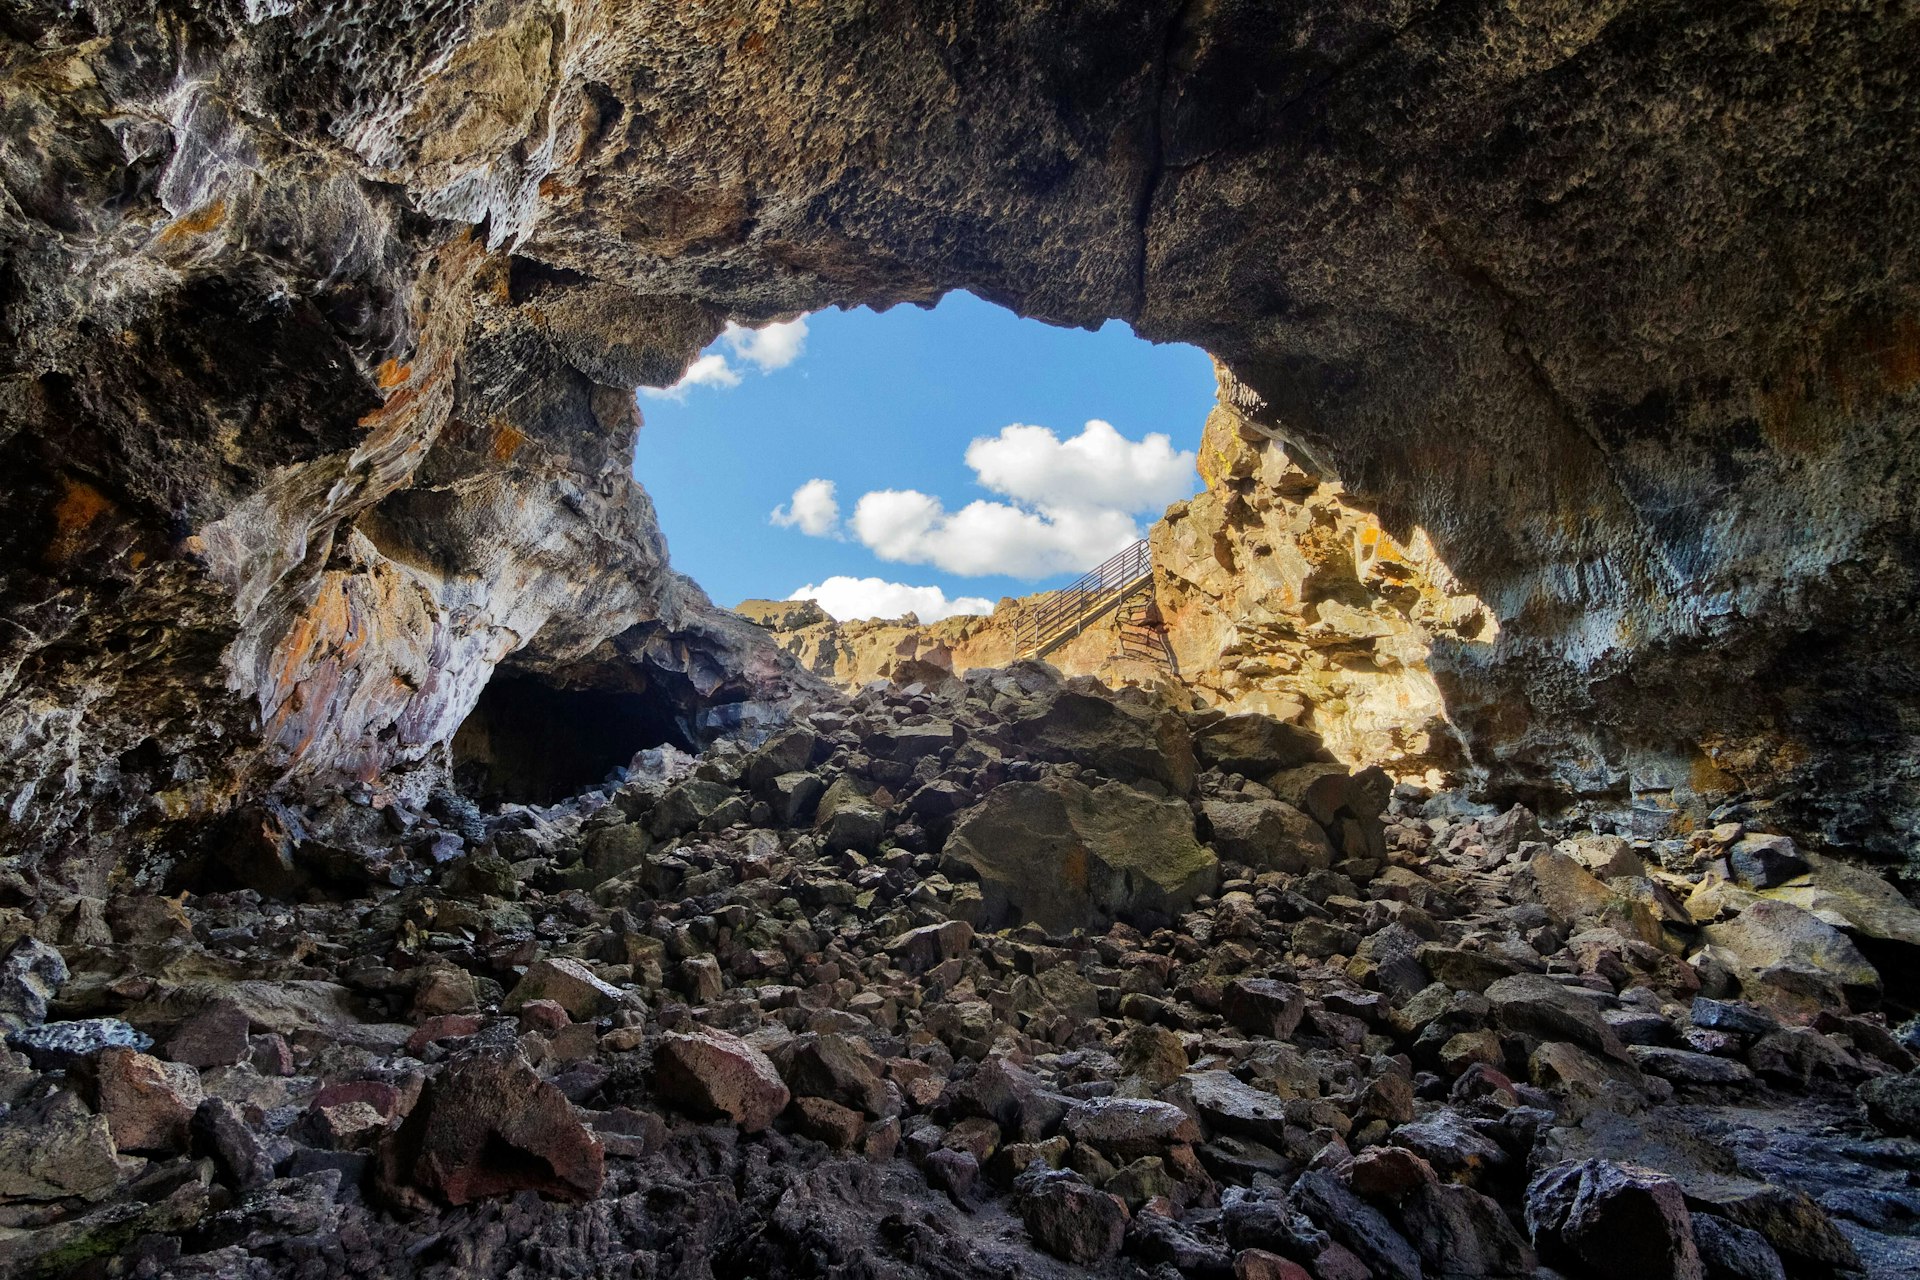 A lava tube cave at Craters of the Moon National Monument. Image by Anna Gorin / Moment Open / Getty